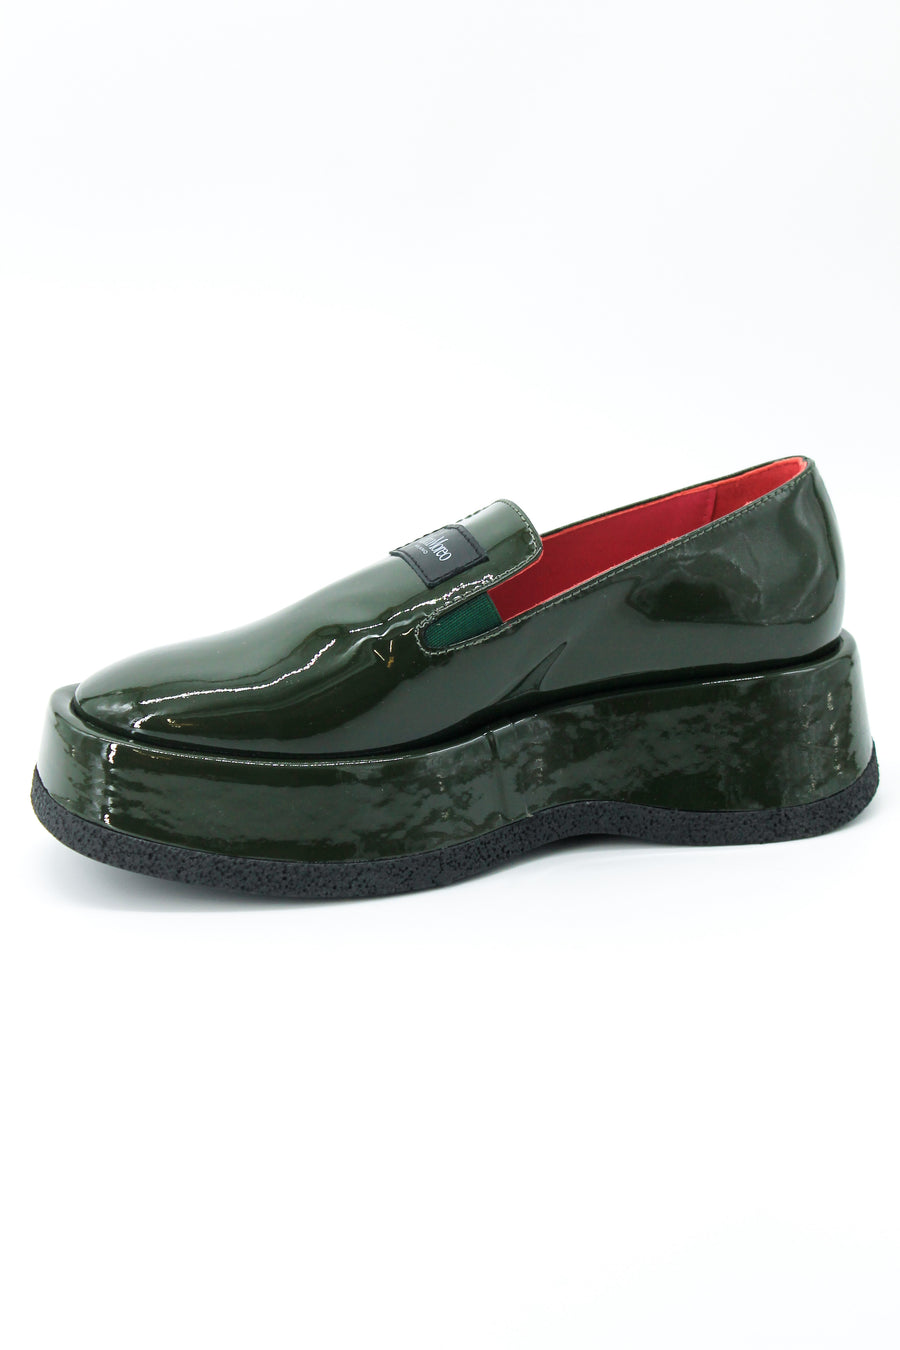 Marco Moreo 9050 Olive